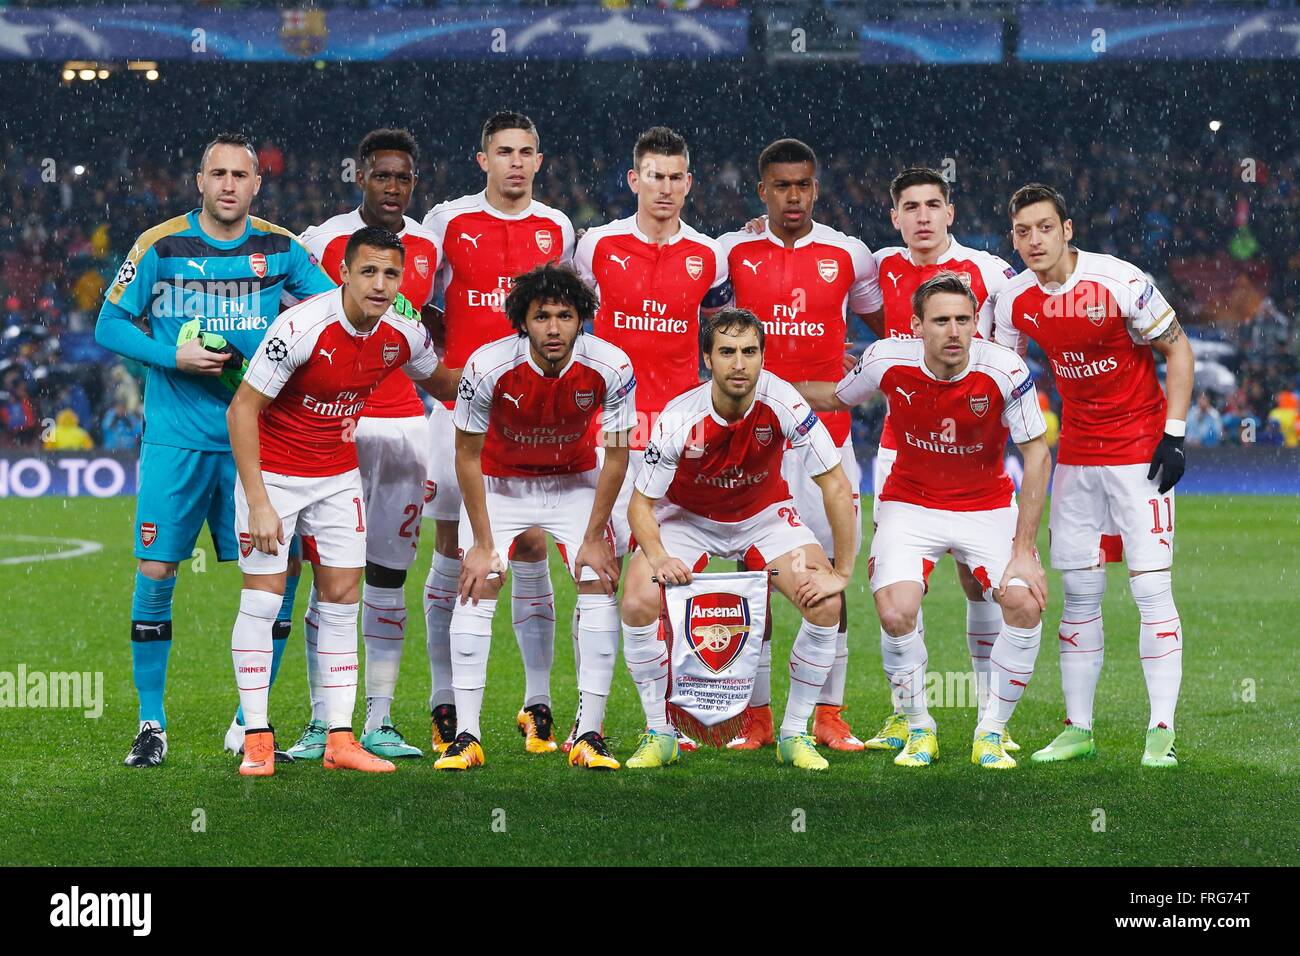 Barcelona, Spain. 16th Mar, 2016. Arsenal team group line-up (Arsenal)  Football/Soccer : UEFA Champions League Round of 16 2nd leg match between  FC Barcelona 3-1 Arsenal FC at the Camp Nou stadium